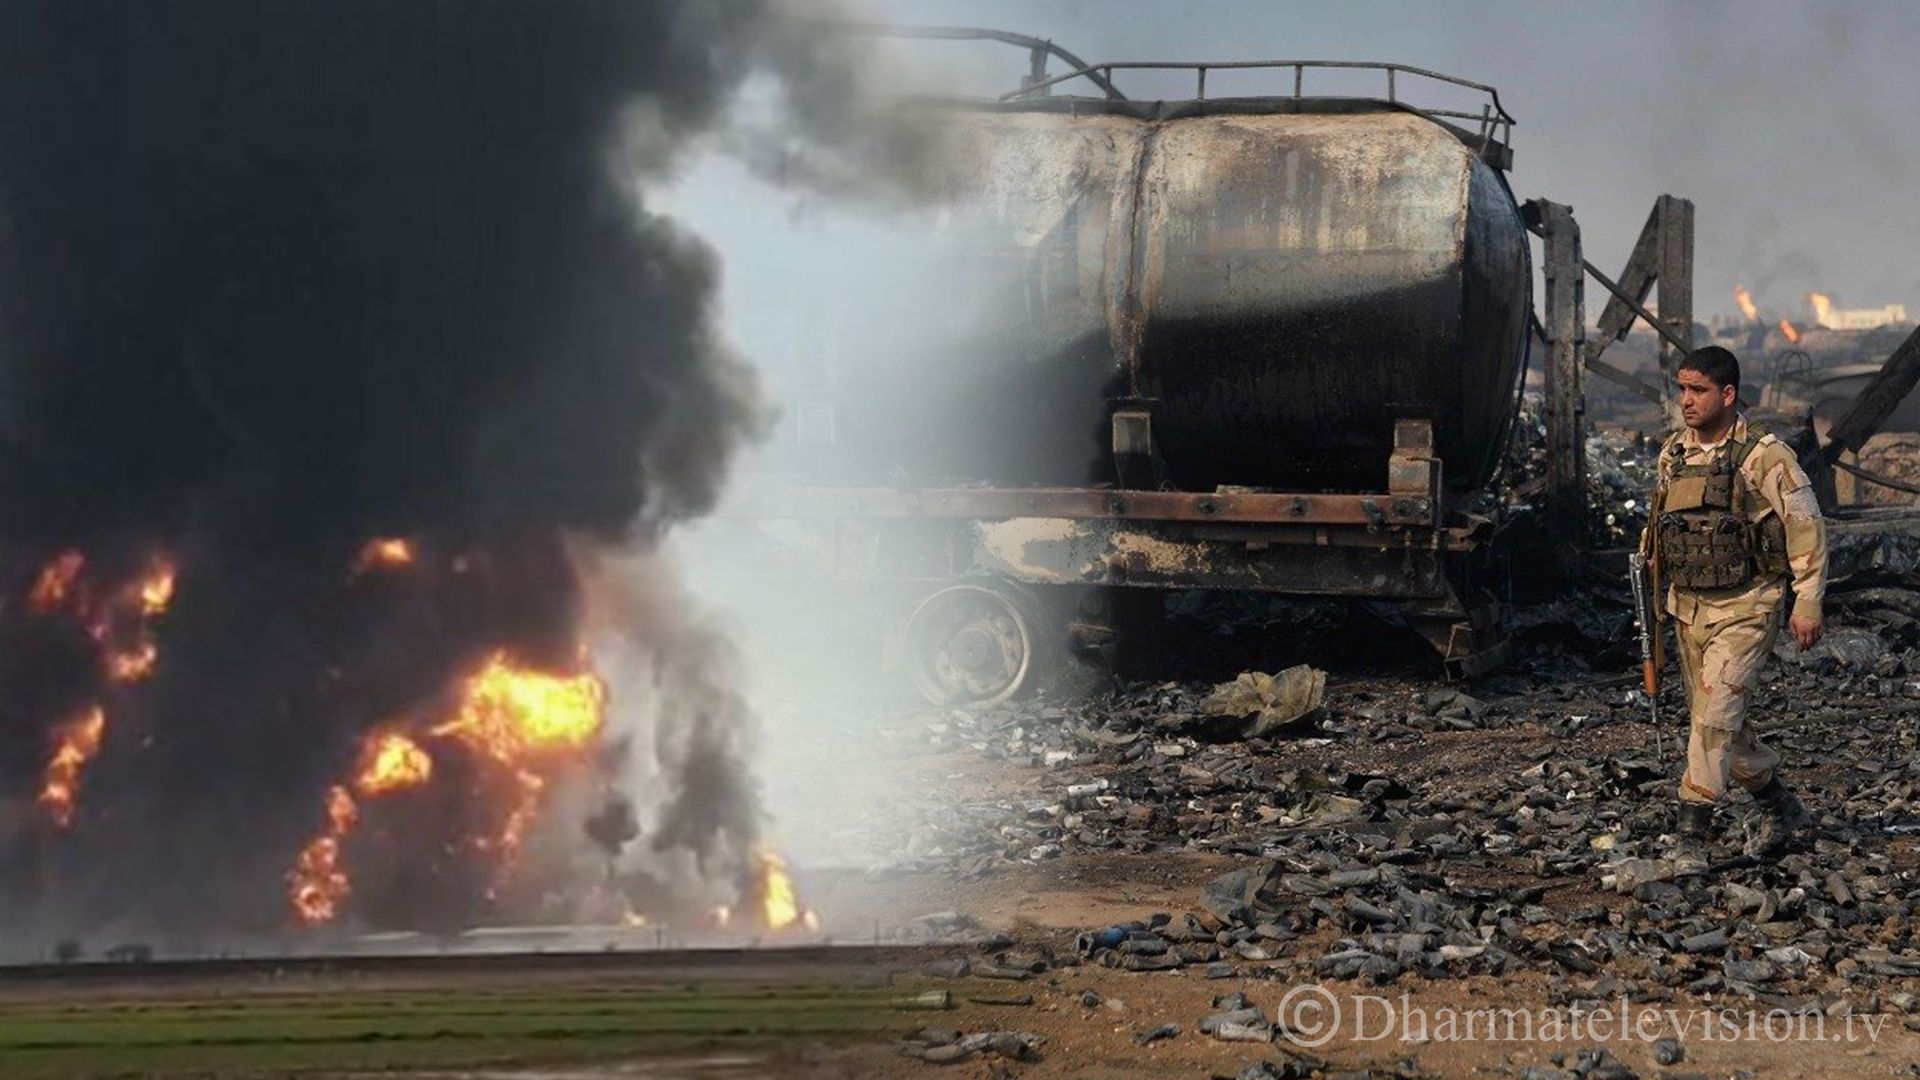 More than 100 oil tankers caught fire on the Afghanistan-Iran border